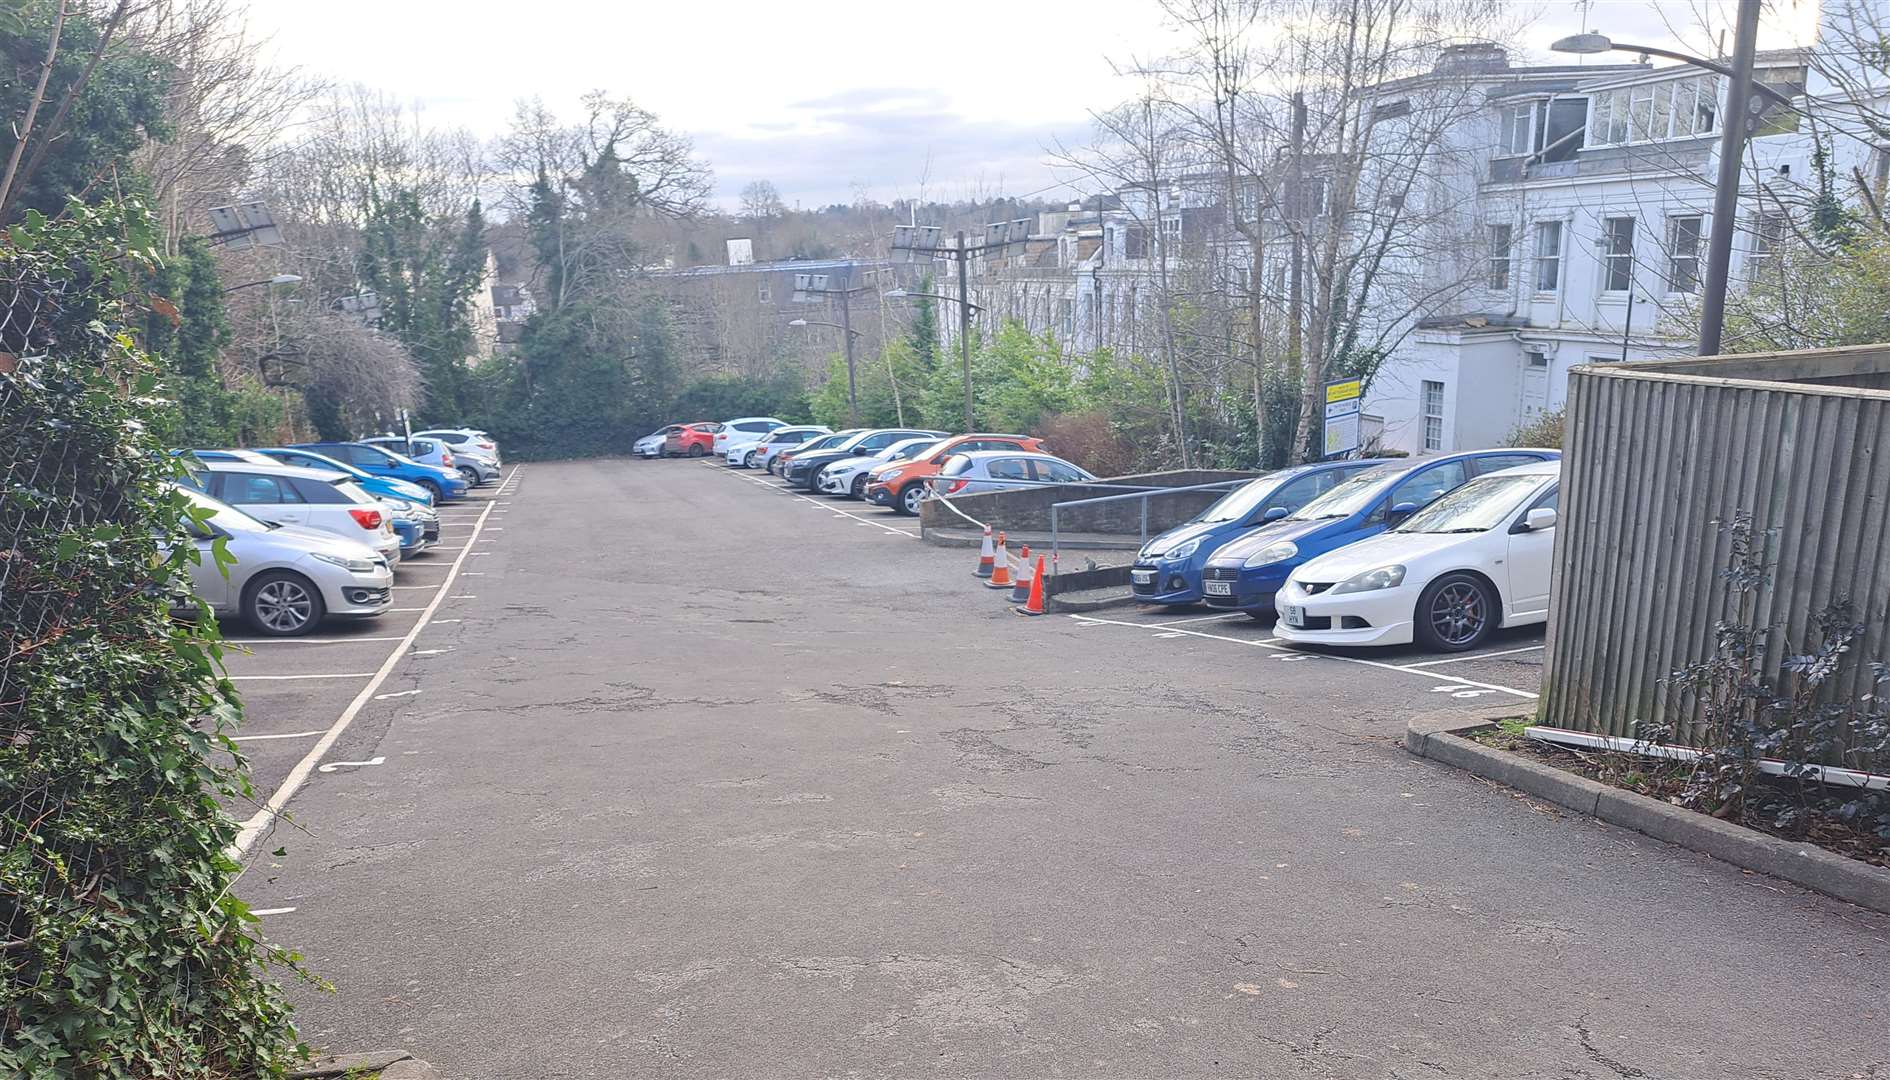 The car park in Mount Pleasant Avenue is up for sale